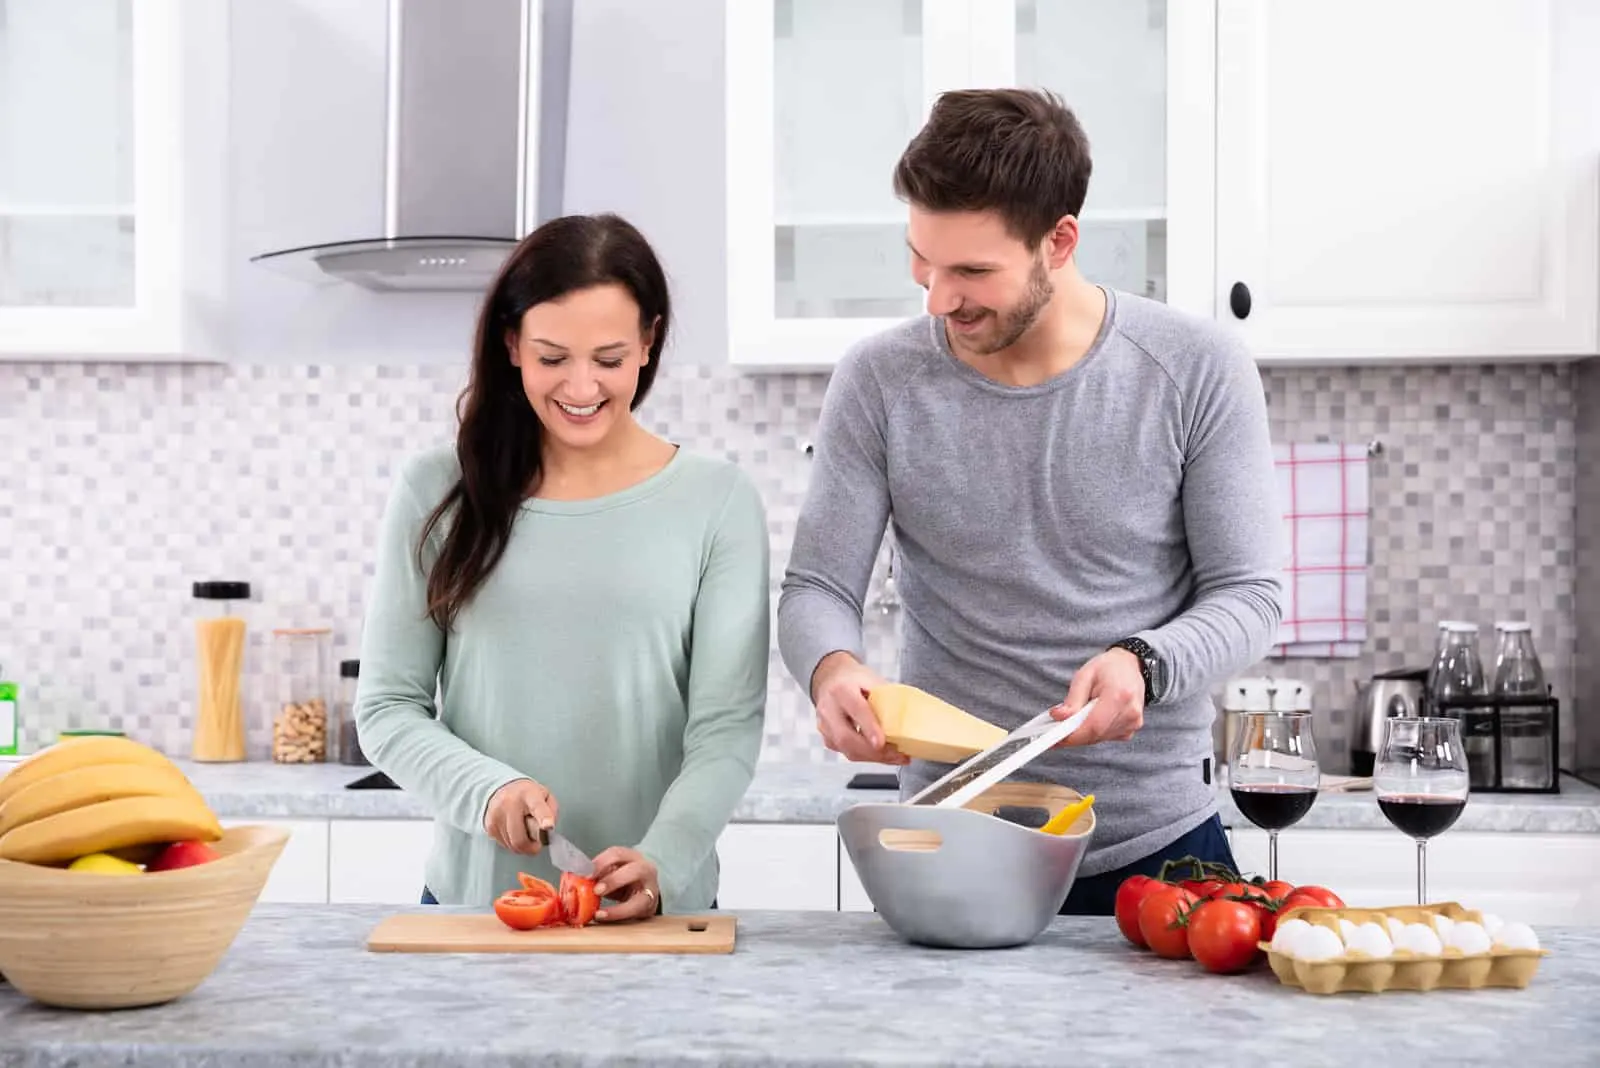 a smiling man helps a woman in the kitchen